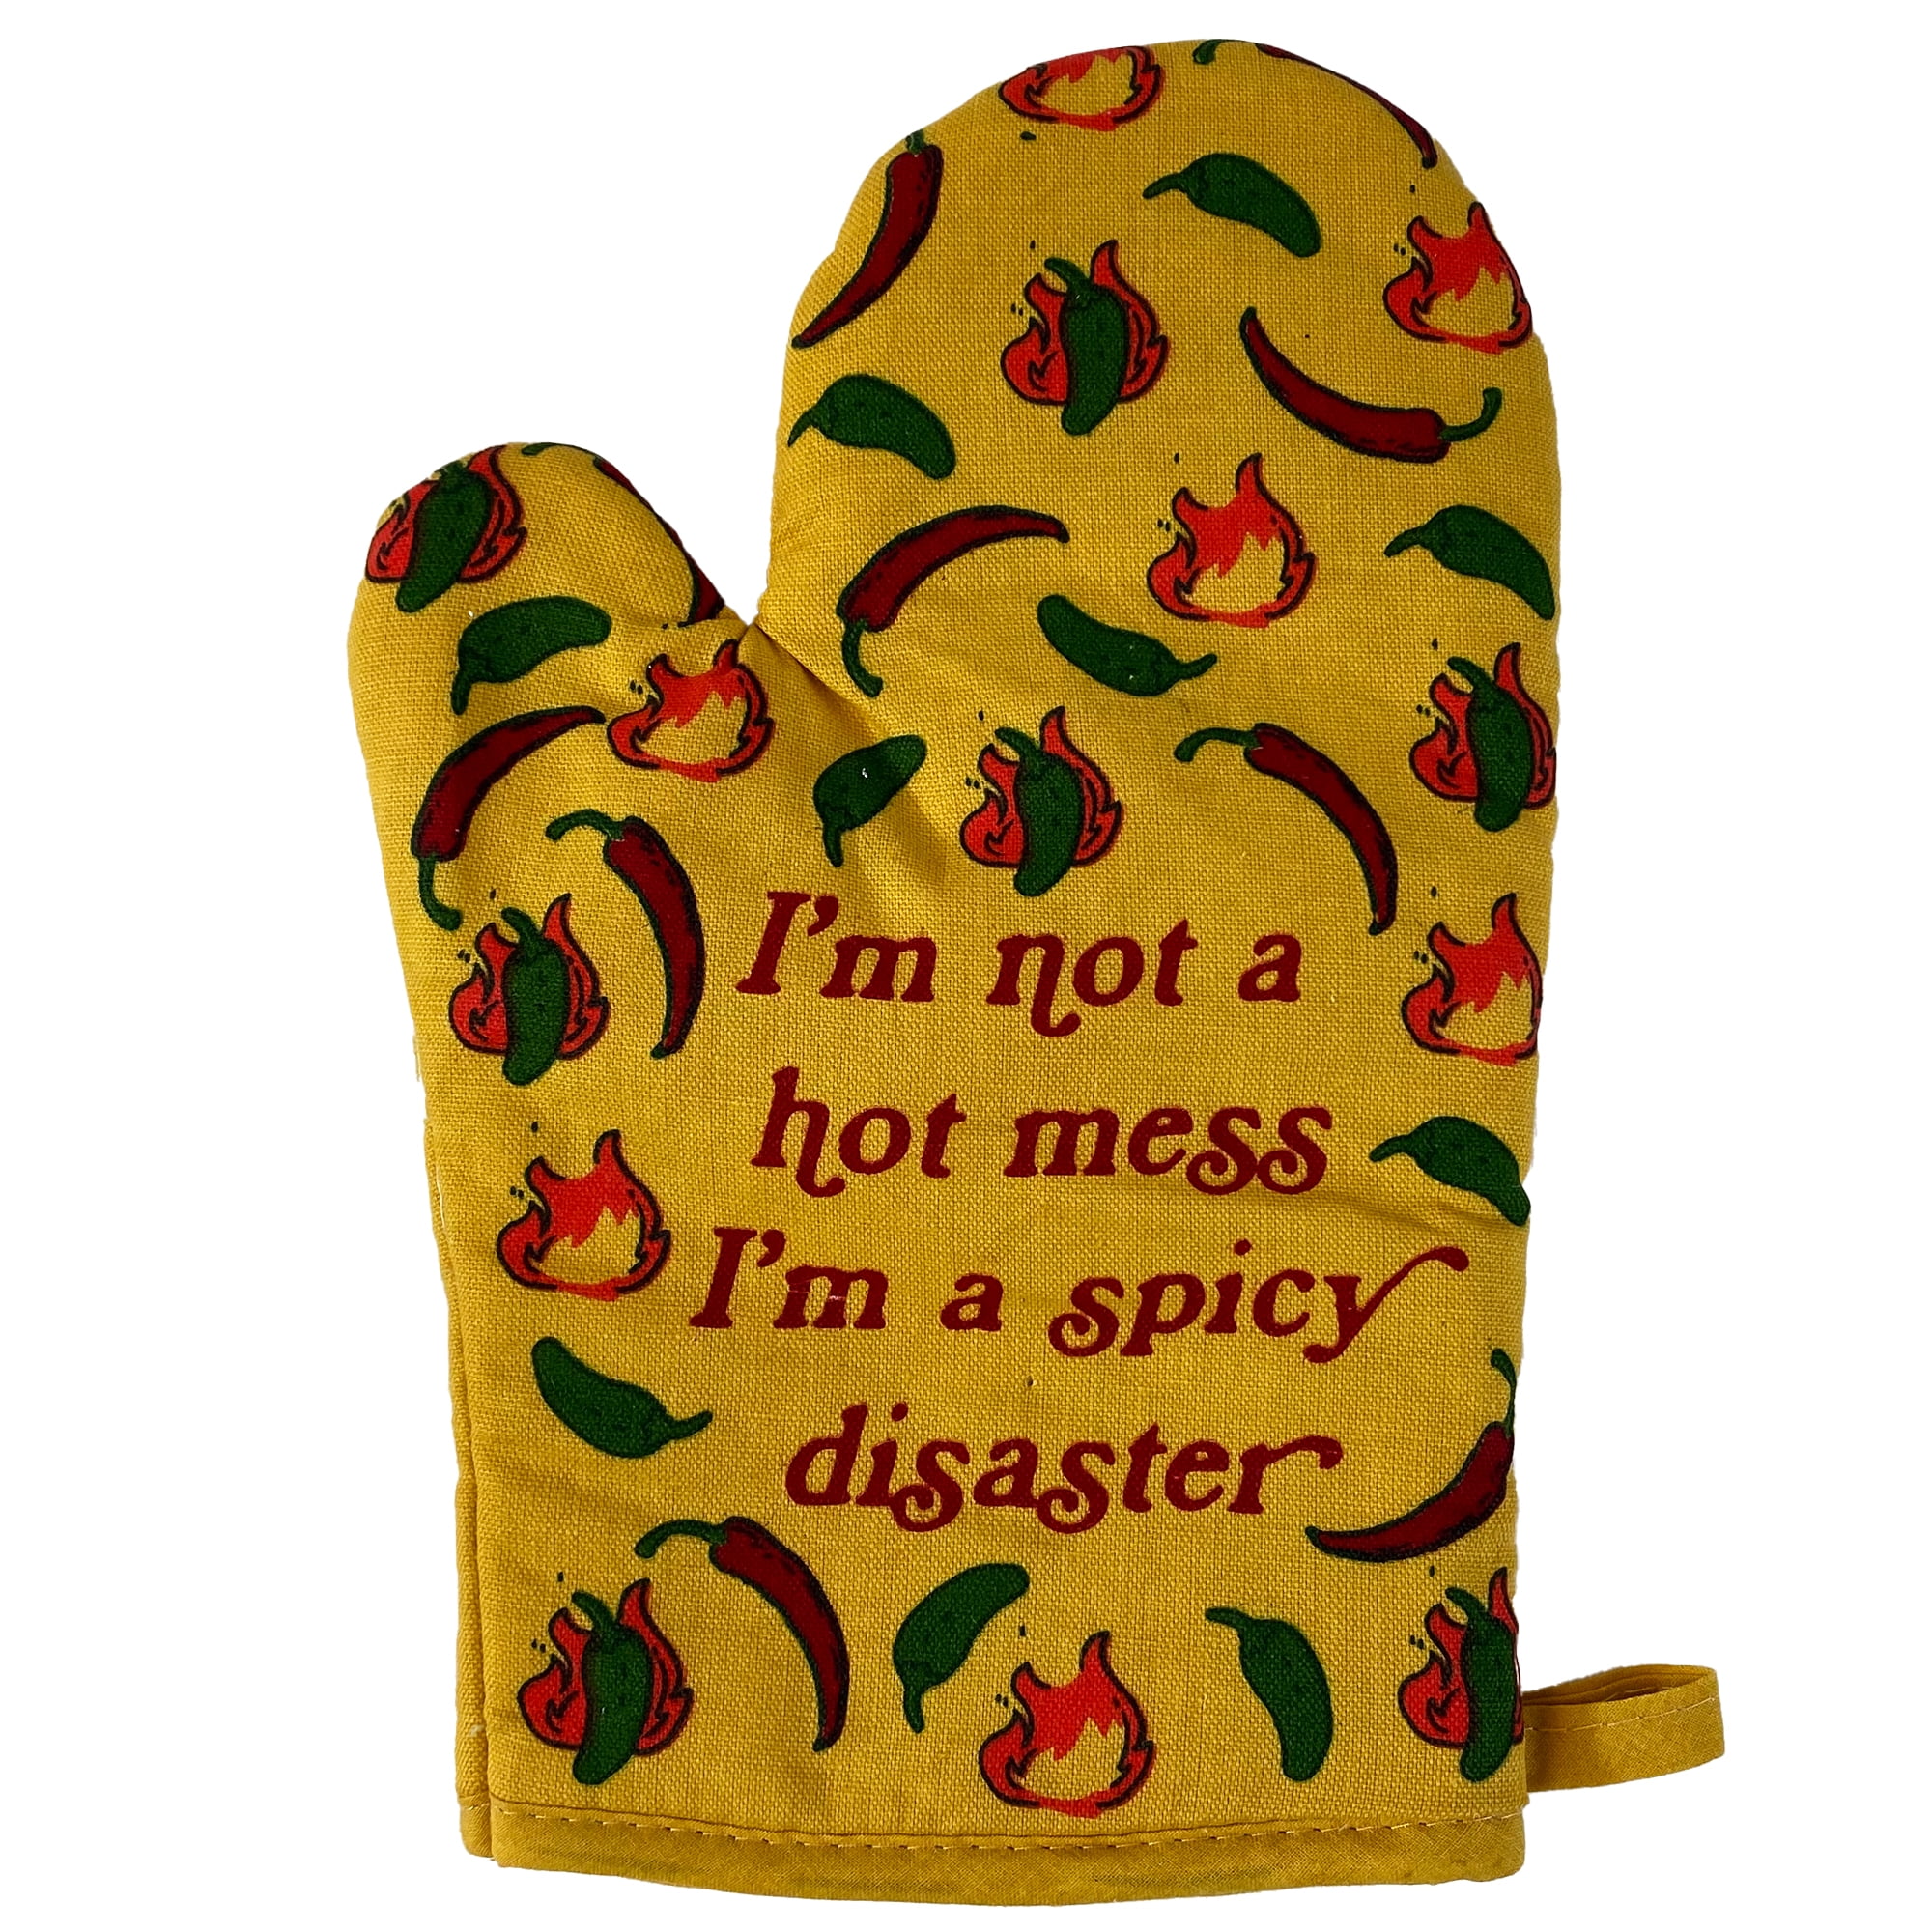 Don't Make Me Poison Your Food Oven Mitt Funny Sarcastic Graphic Kitchen Accessories (Oven Mitt)